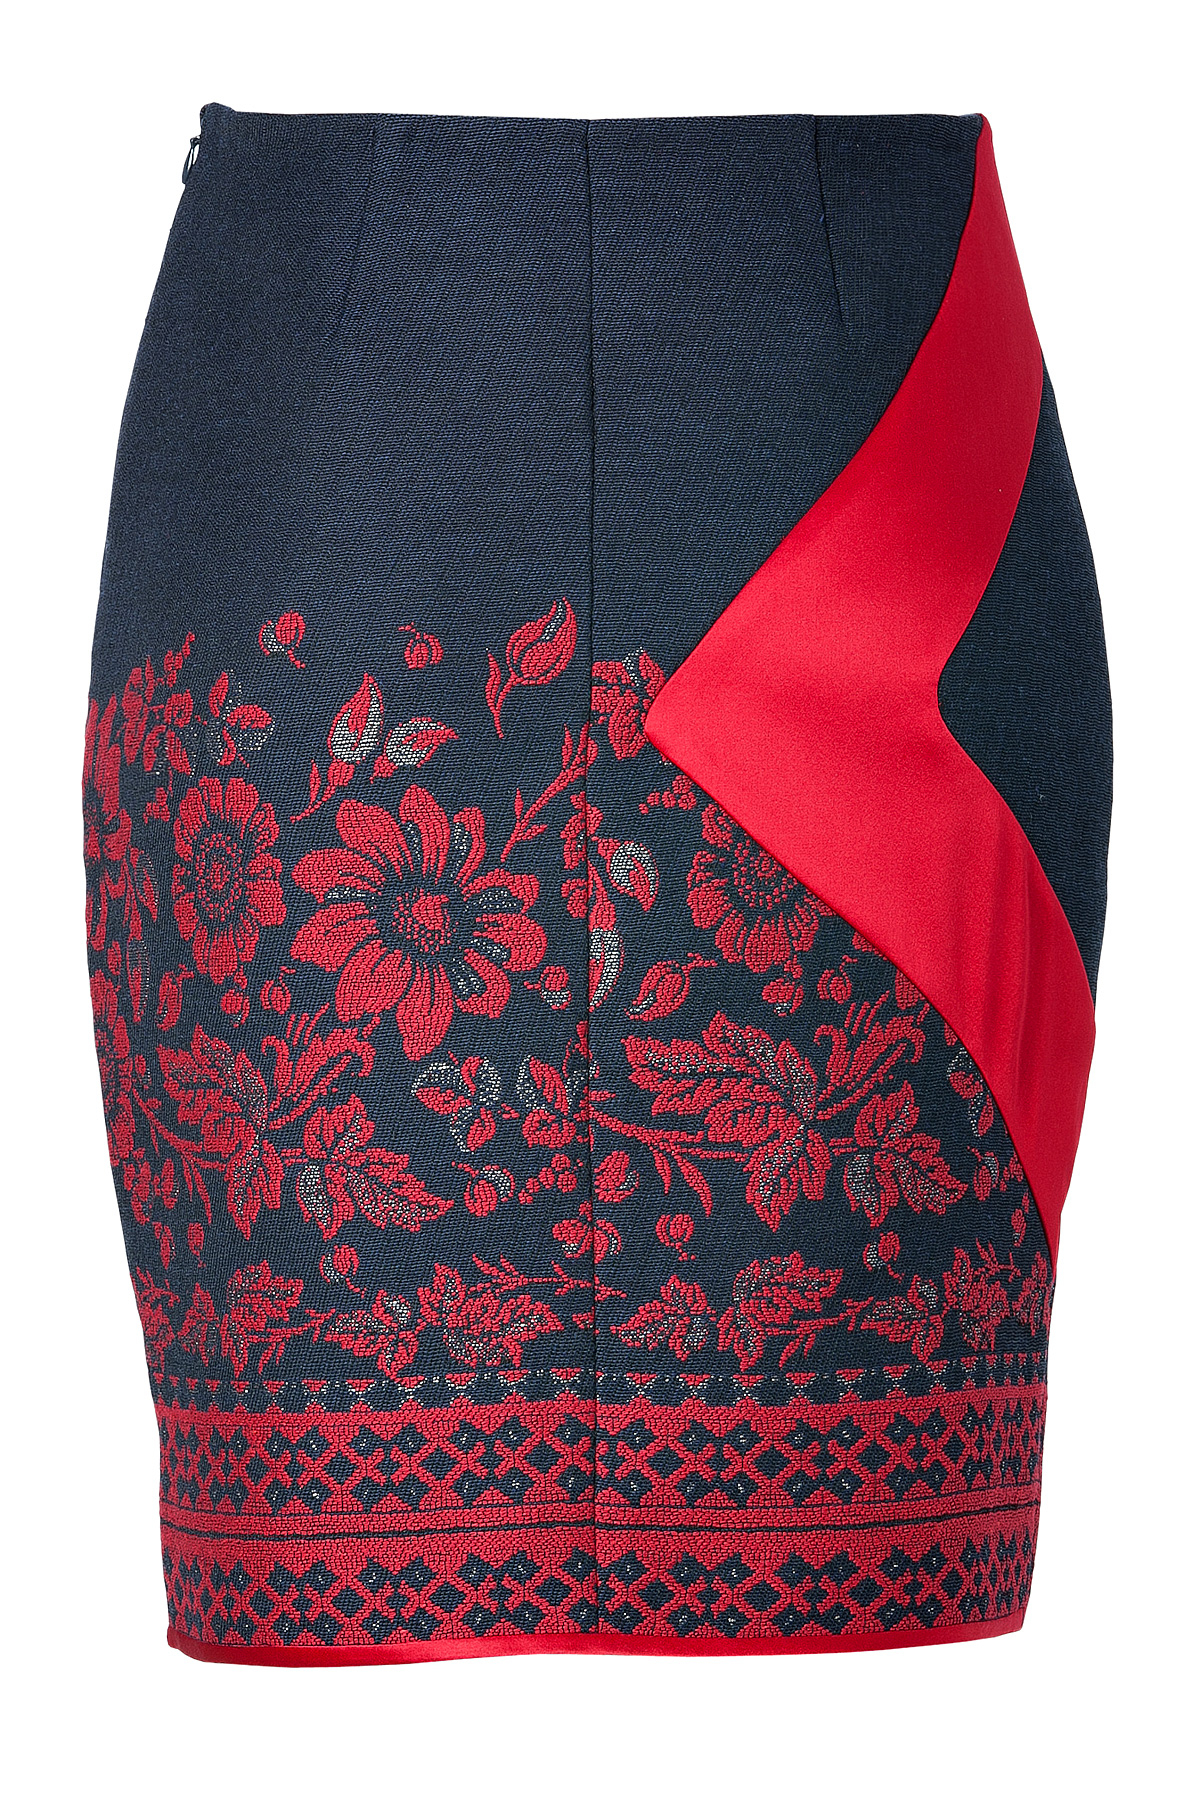 Lyst - Prabal Gurung Piped Border Panel Skirt In Red Floral Print in Red